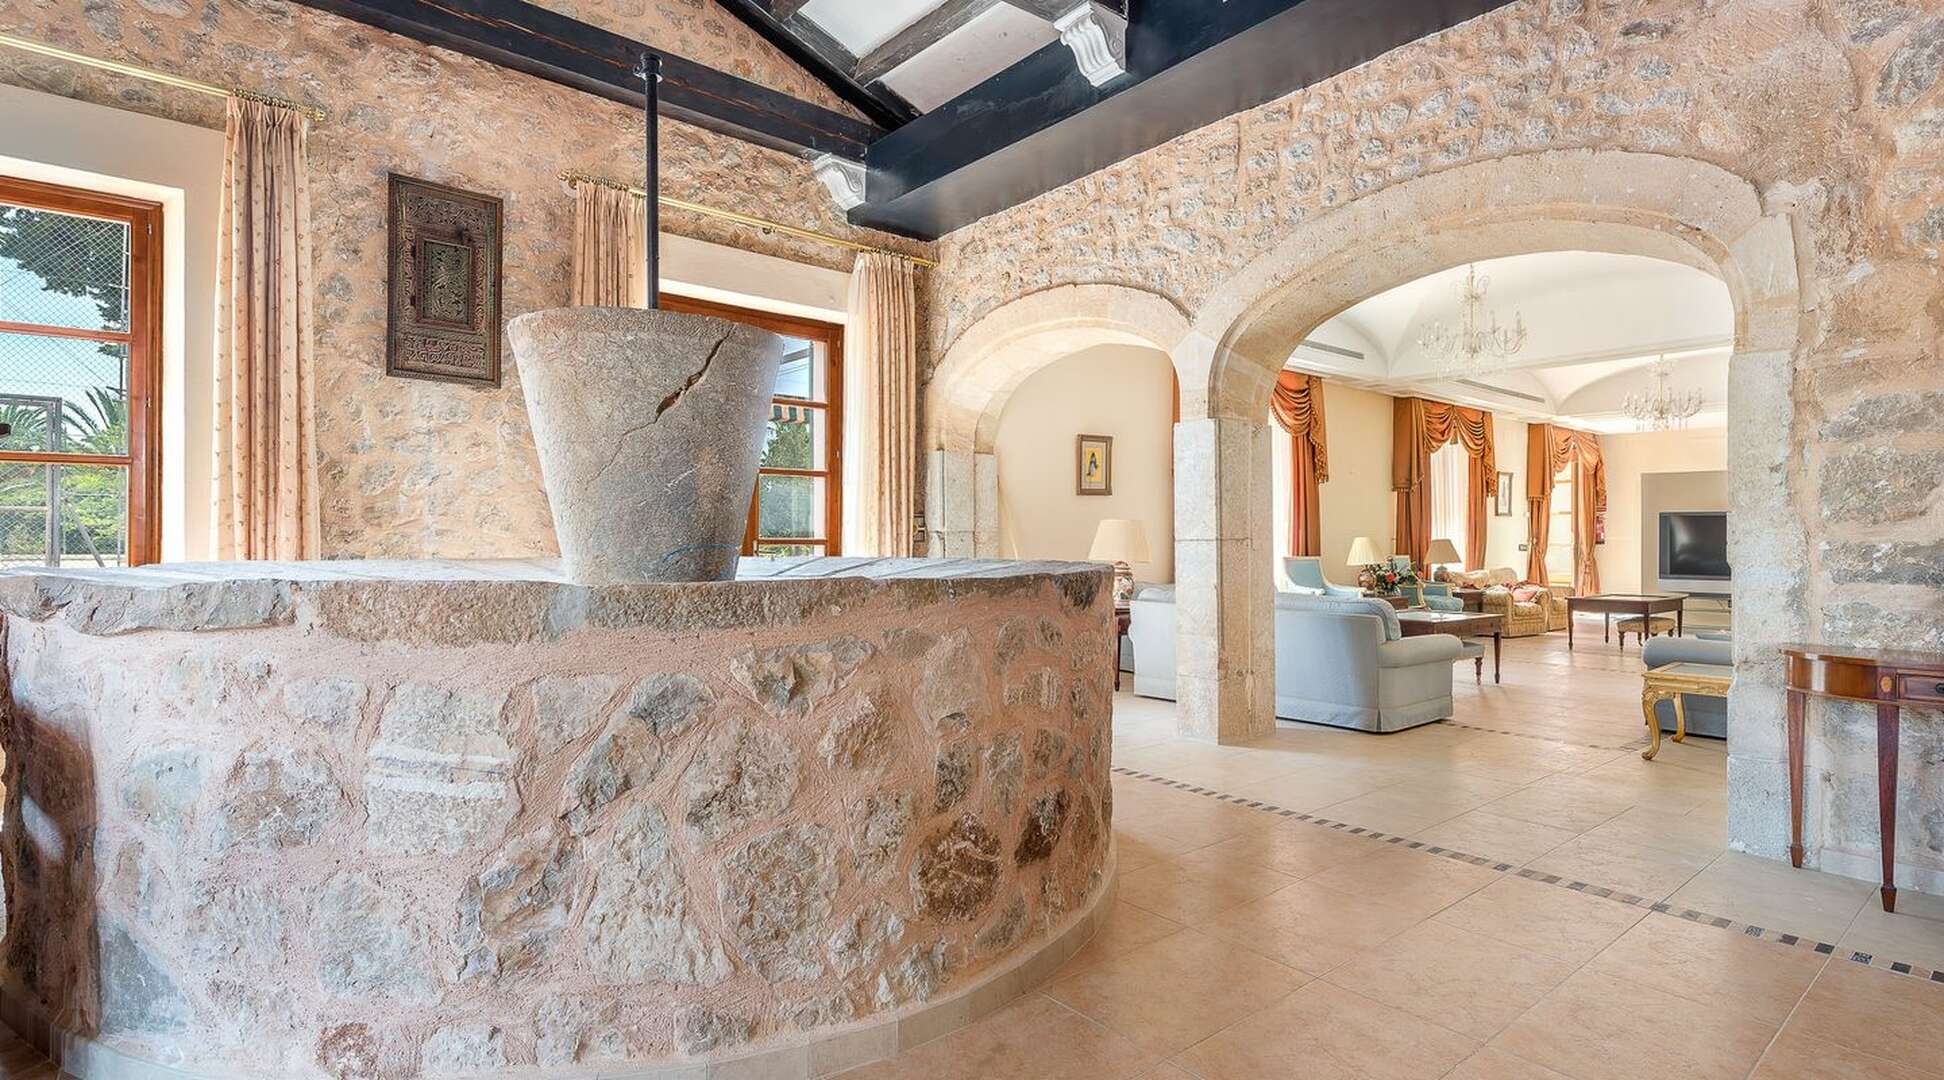 Manor house with 84 rooms, pool and park near Valldemossa